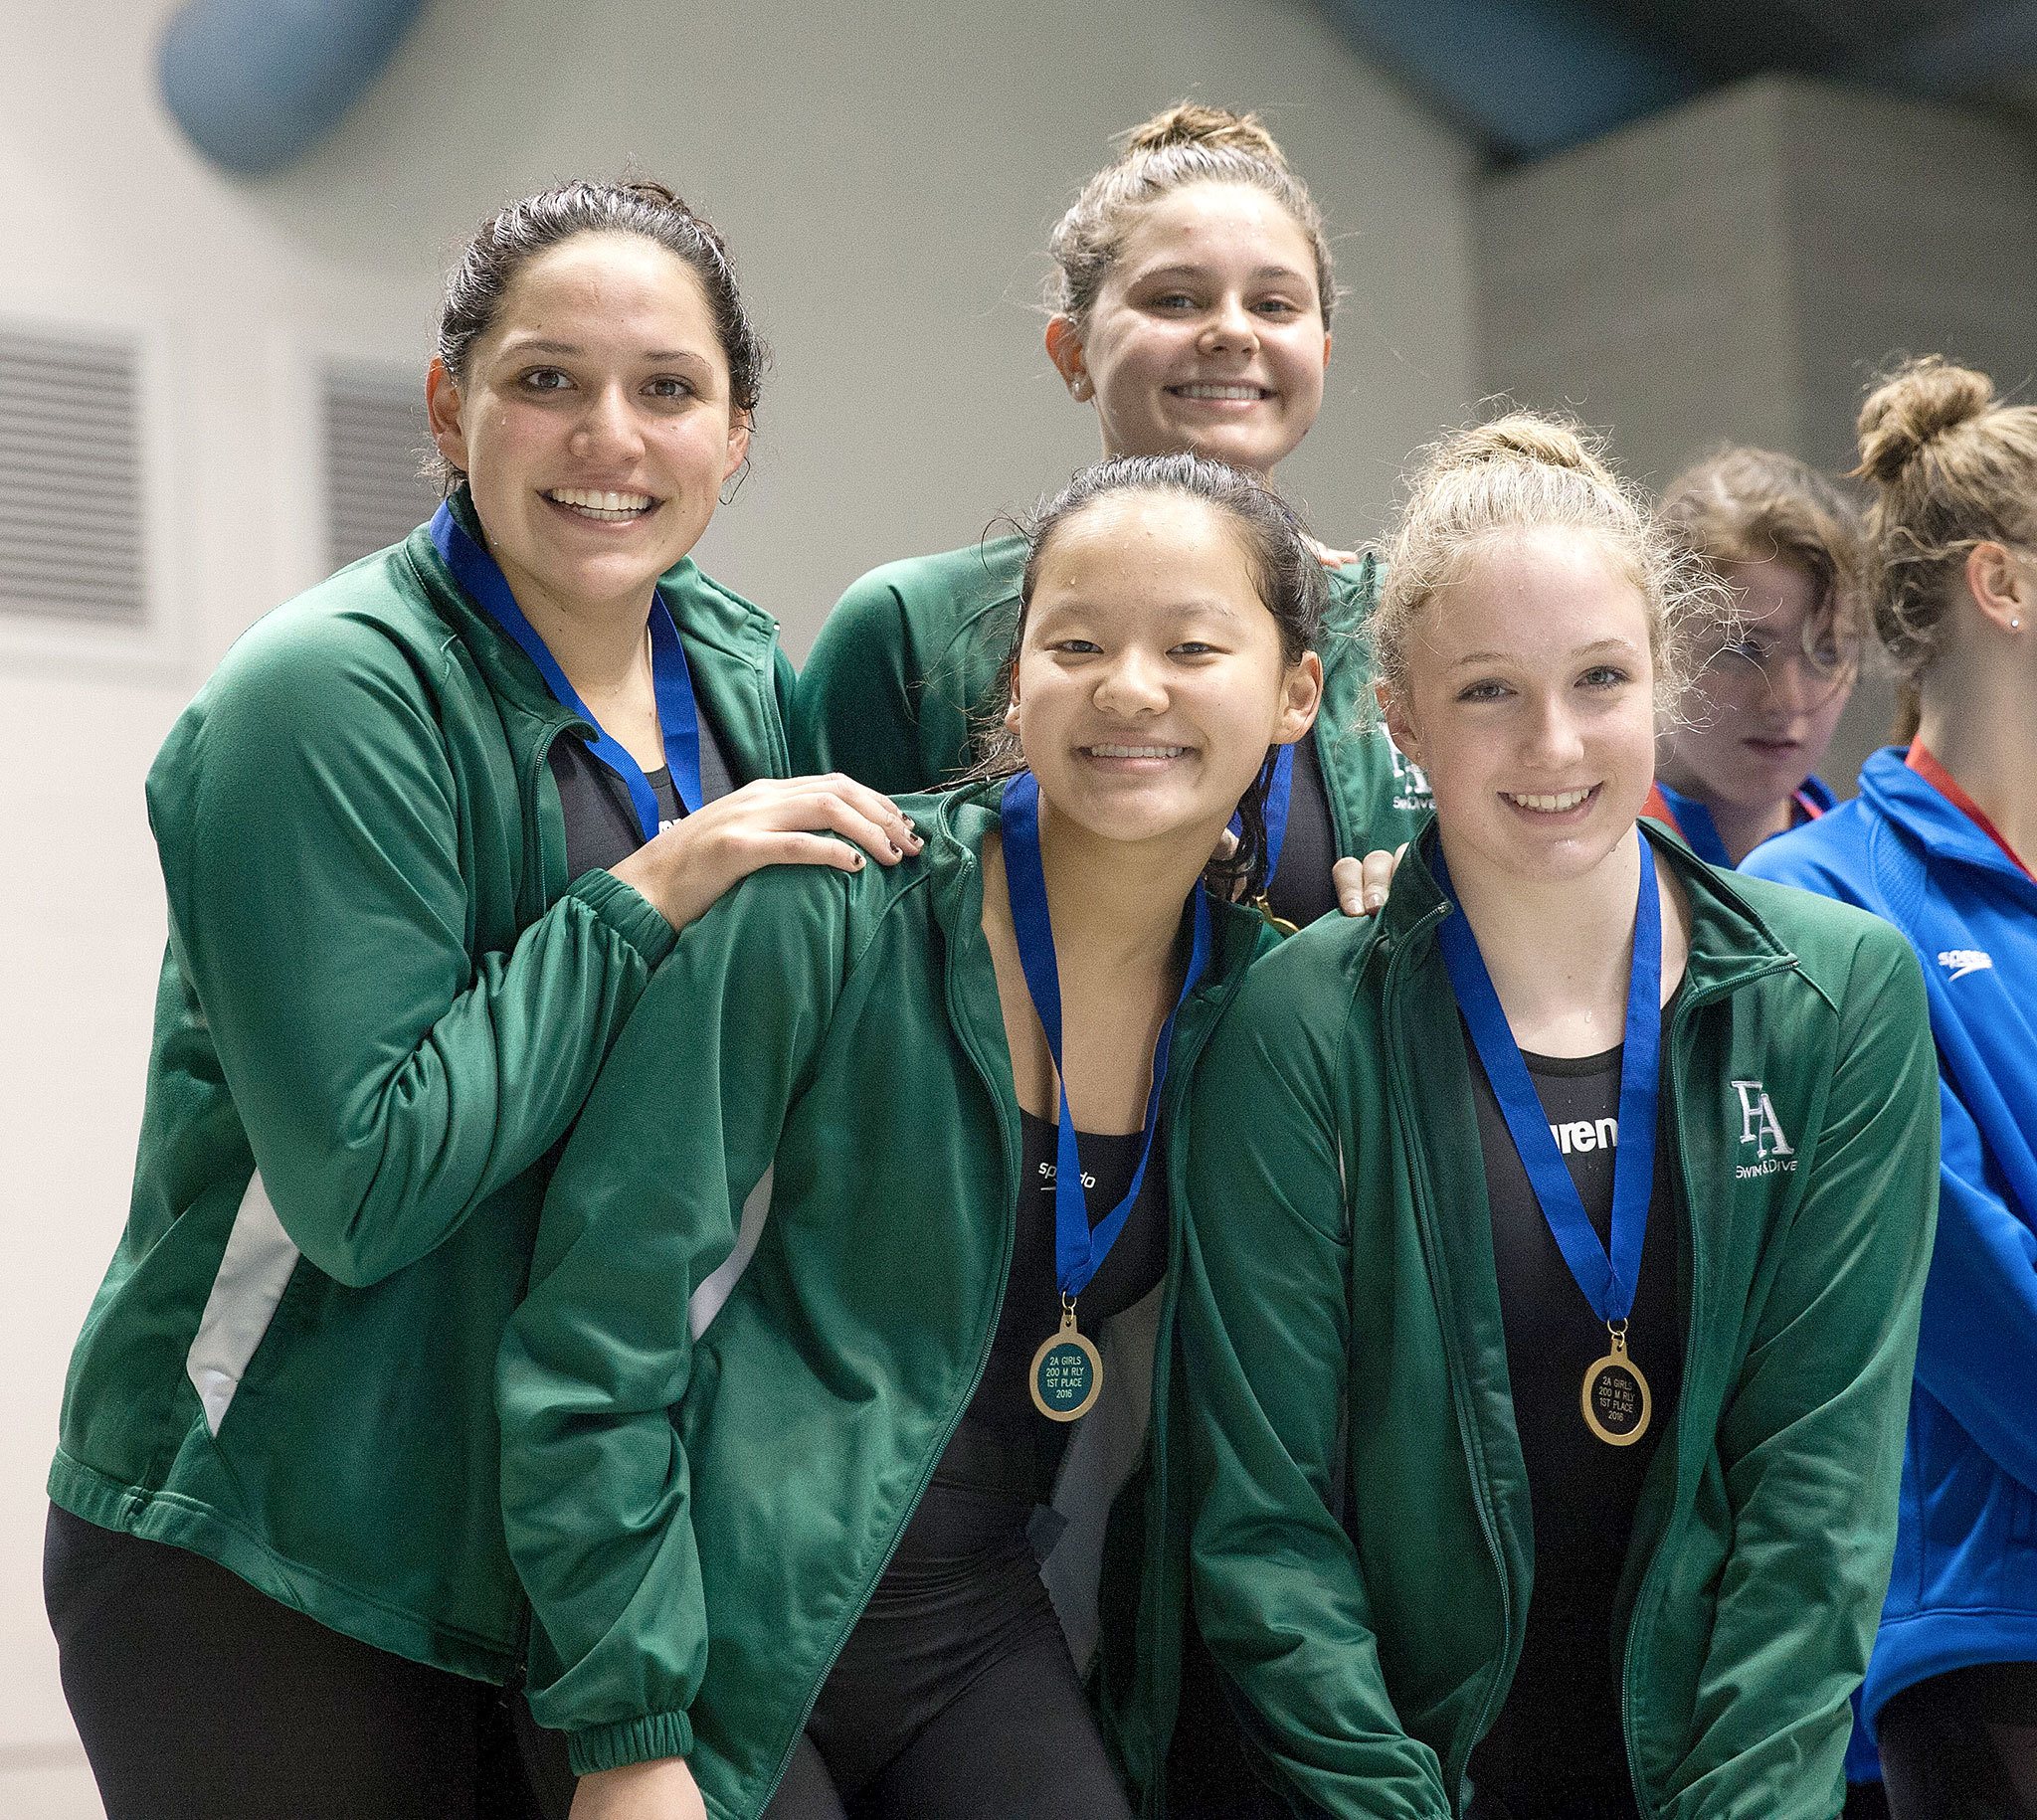 Port Angeles High School photo                                Port Angeles’ 200 medley relay team celebrates winning first place at the State 2A Swim and Dive Championships Saturday. The relay team is Jaine Macias, Felicia Che, Nadia Cole and Kenzie Johnson.